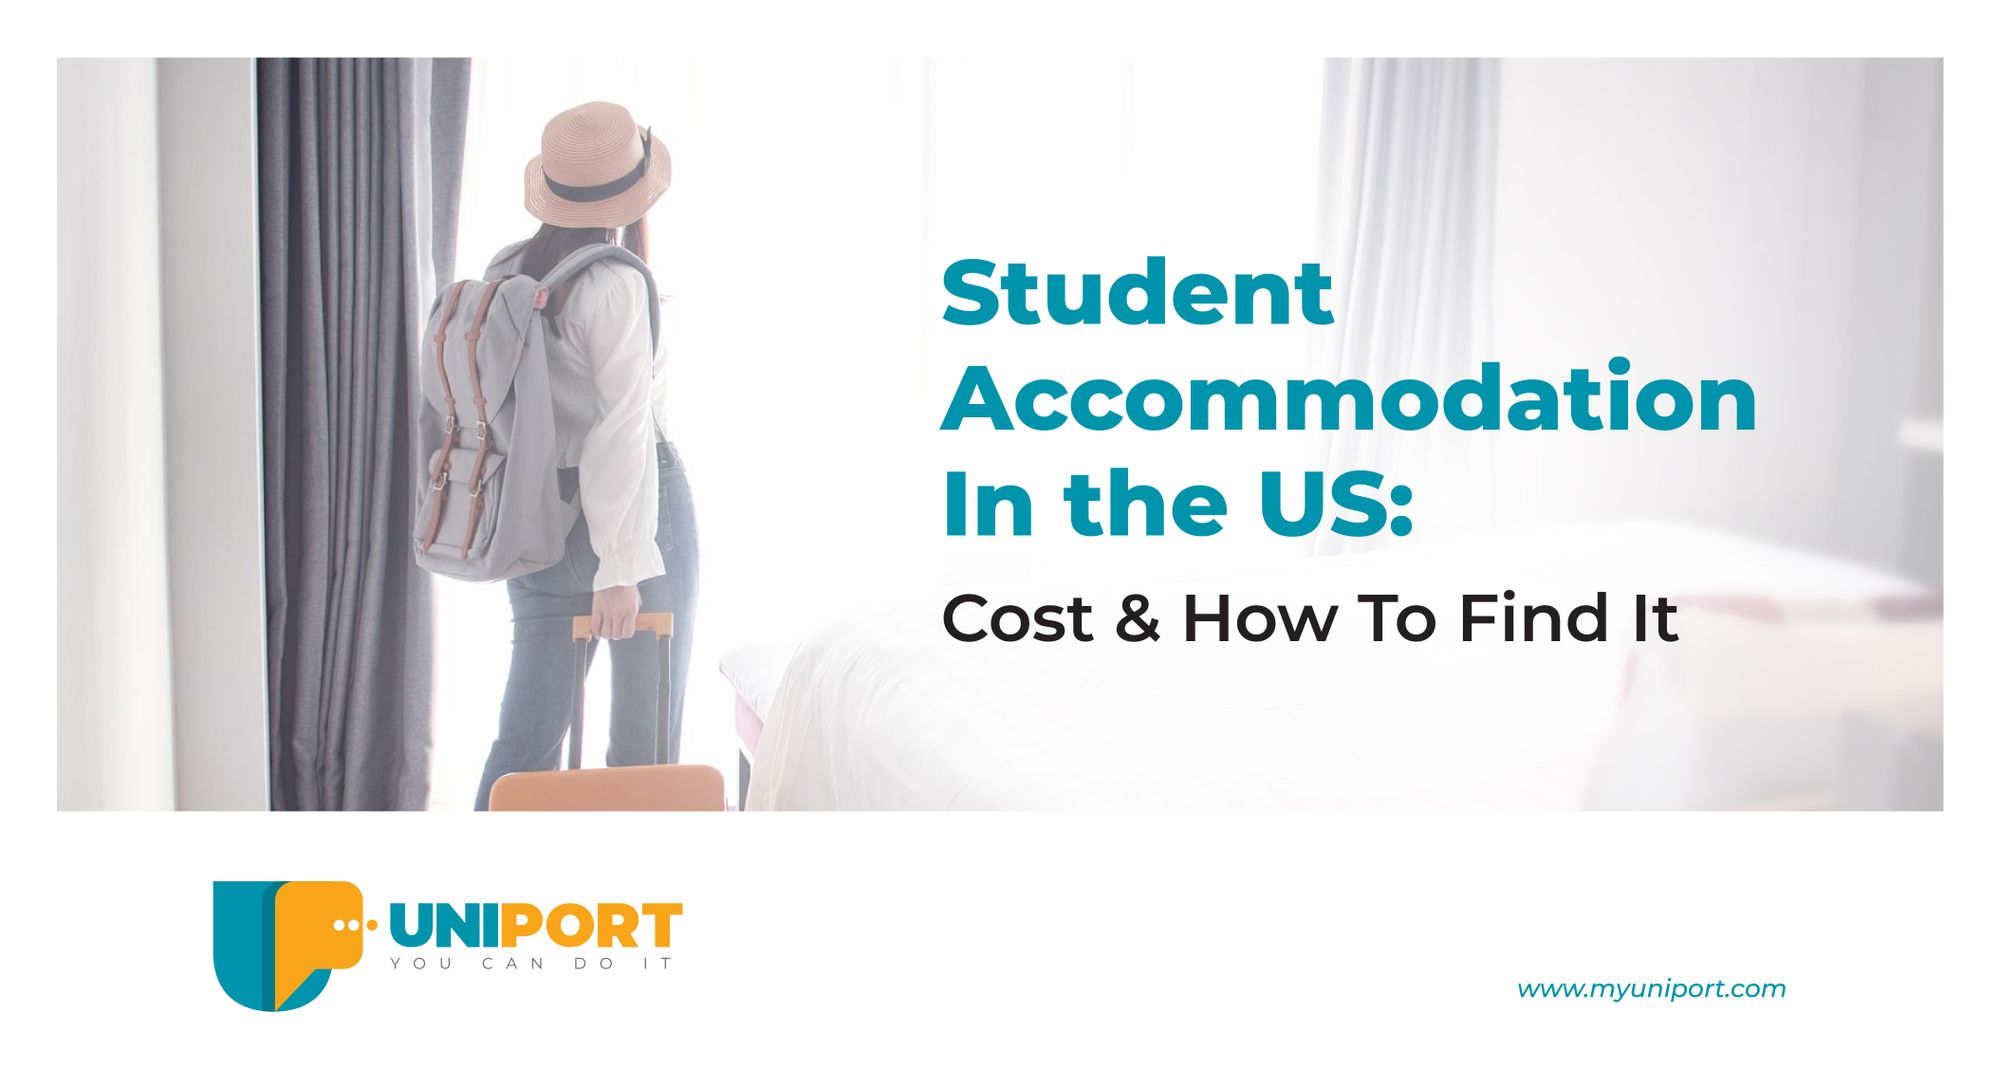 Student Accommodation In The US: Cost & How To Find It